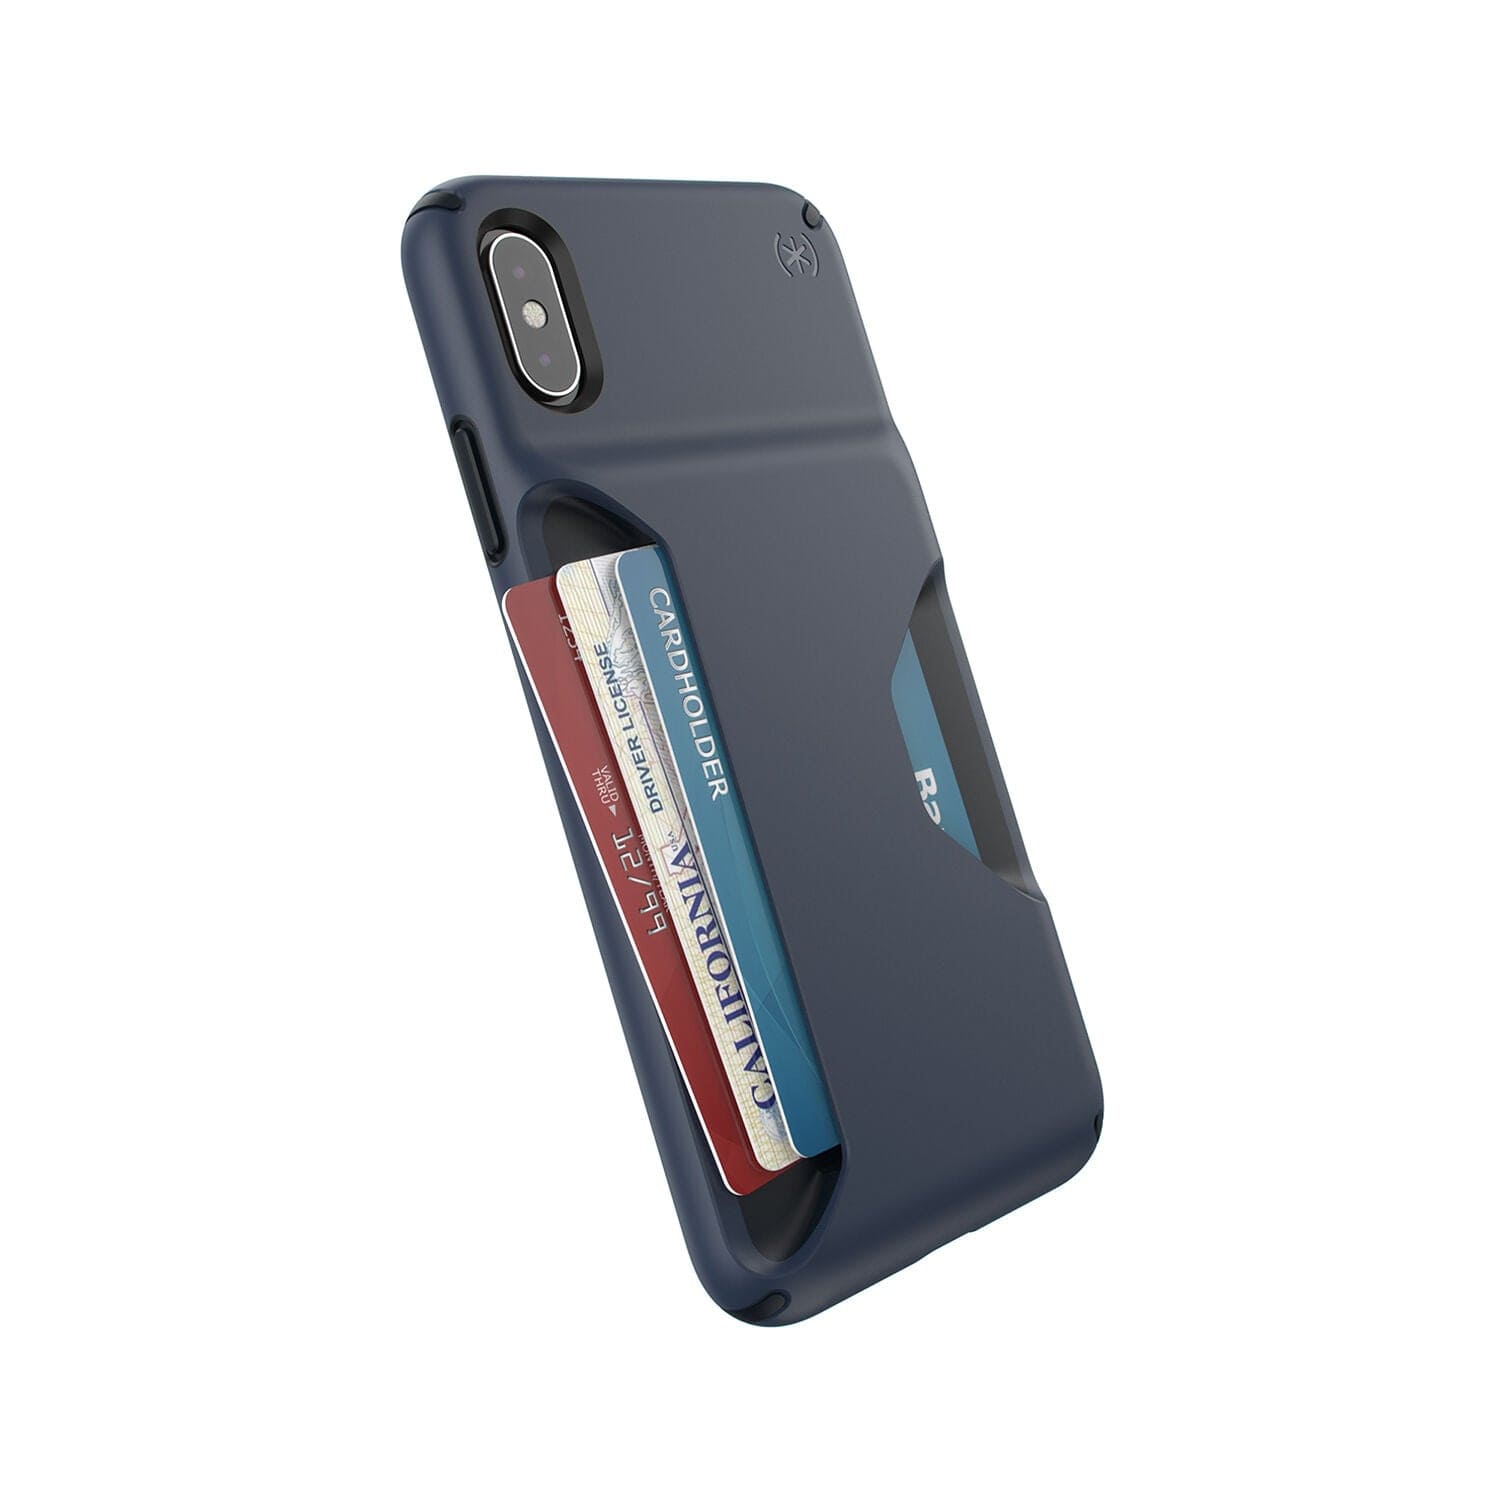 Speck Presidio WALLET iPhone XS Max Cases Best iPhone XS Max - $49.99